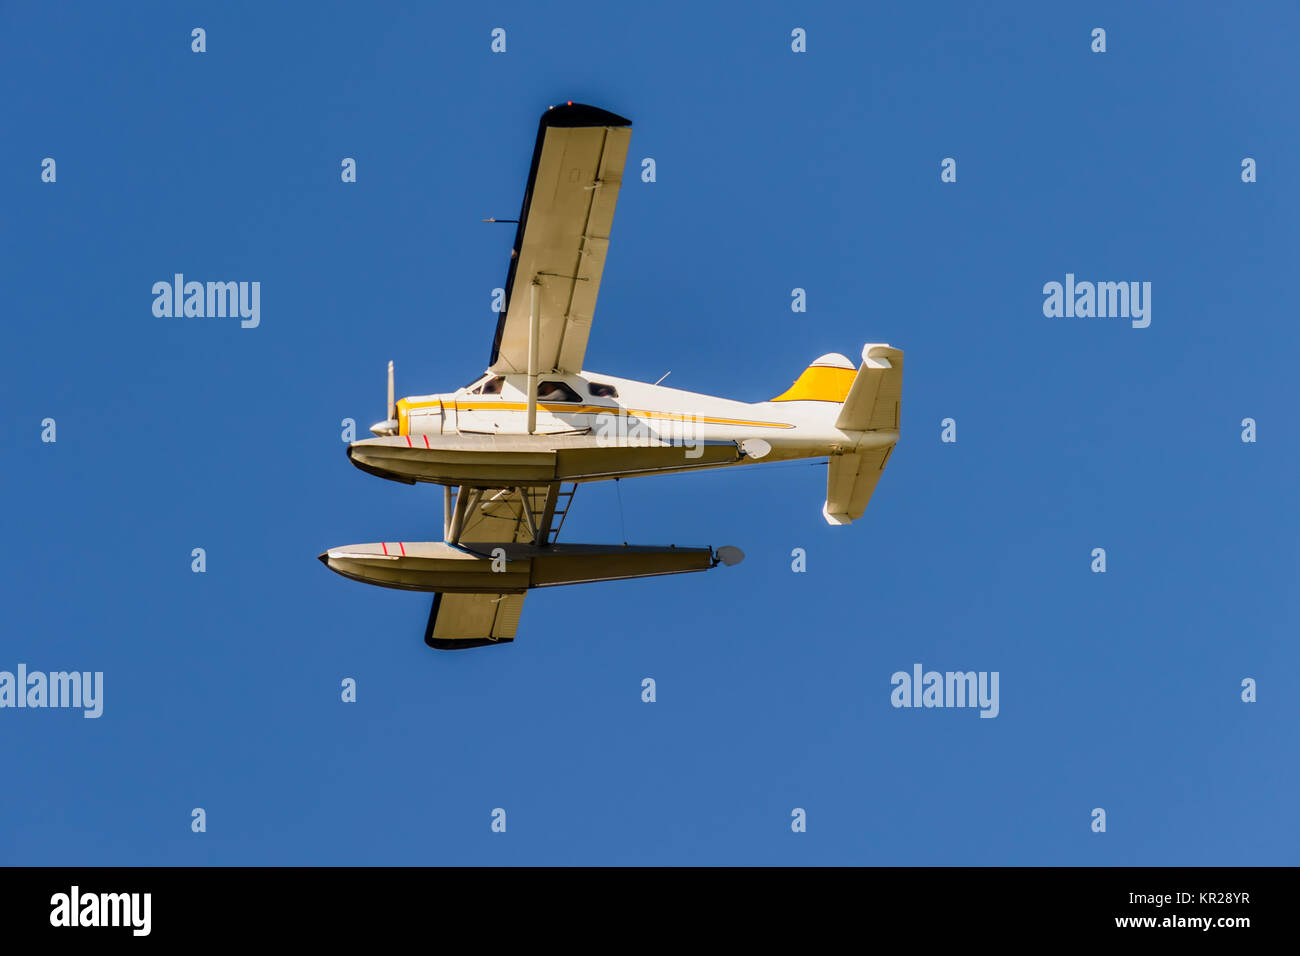 view from below on a seaplane with wings, a propeller and a yellow stripe flying in a blue sky Stock Photo